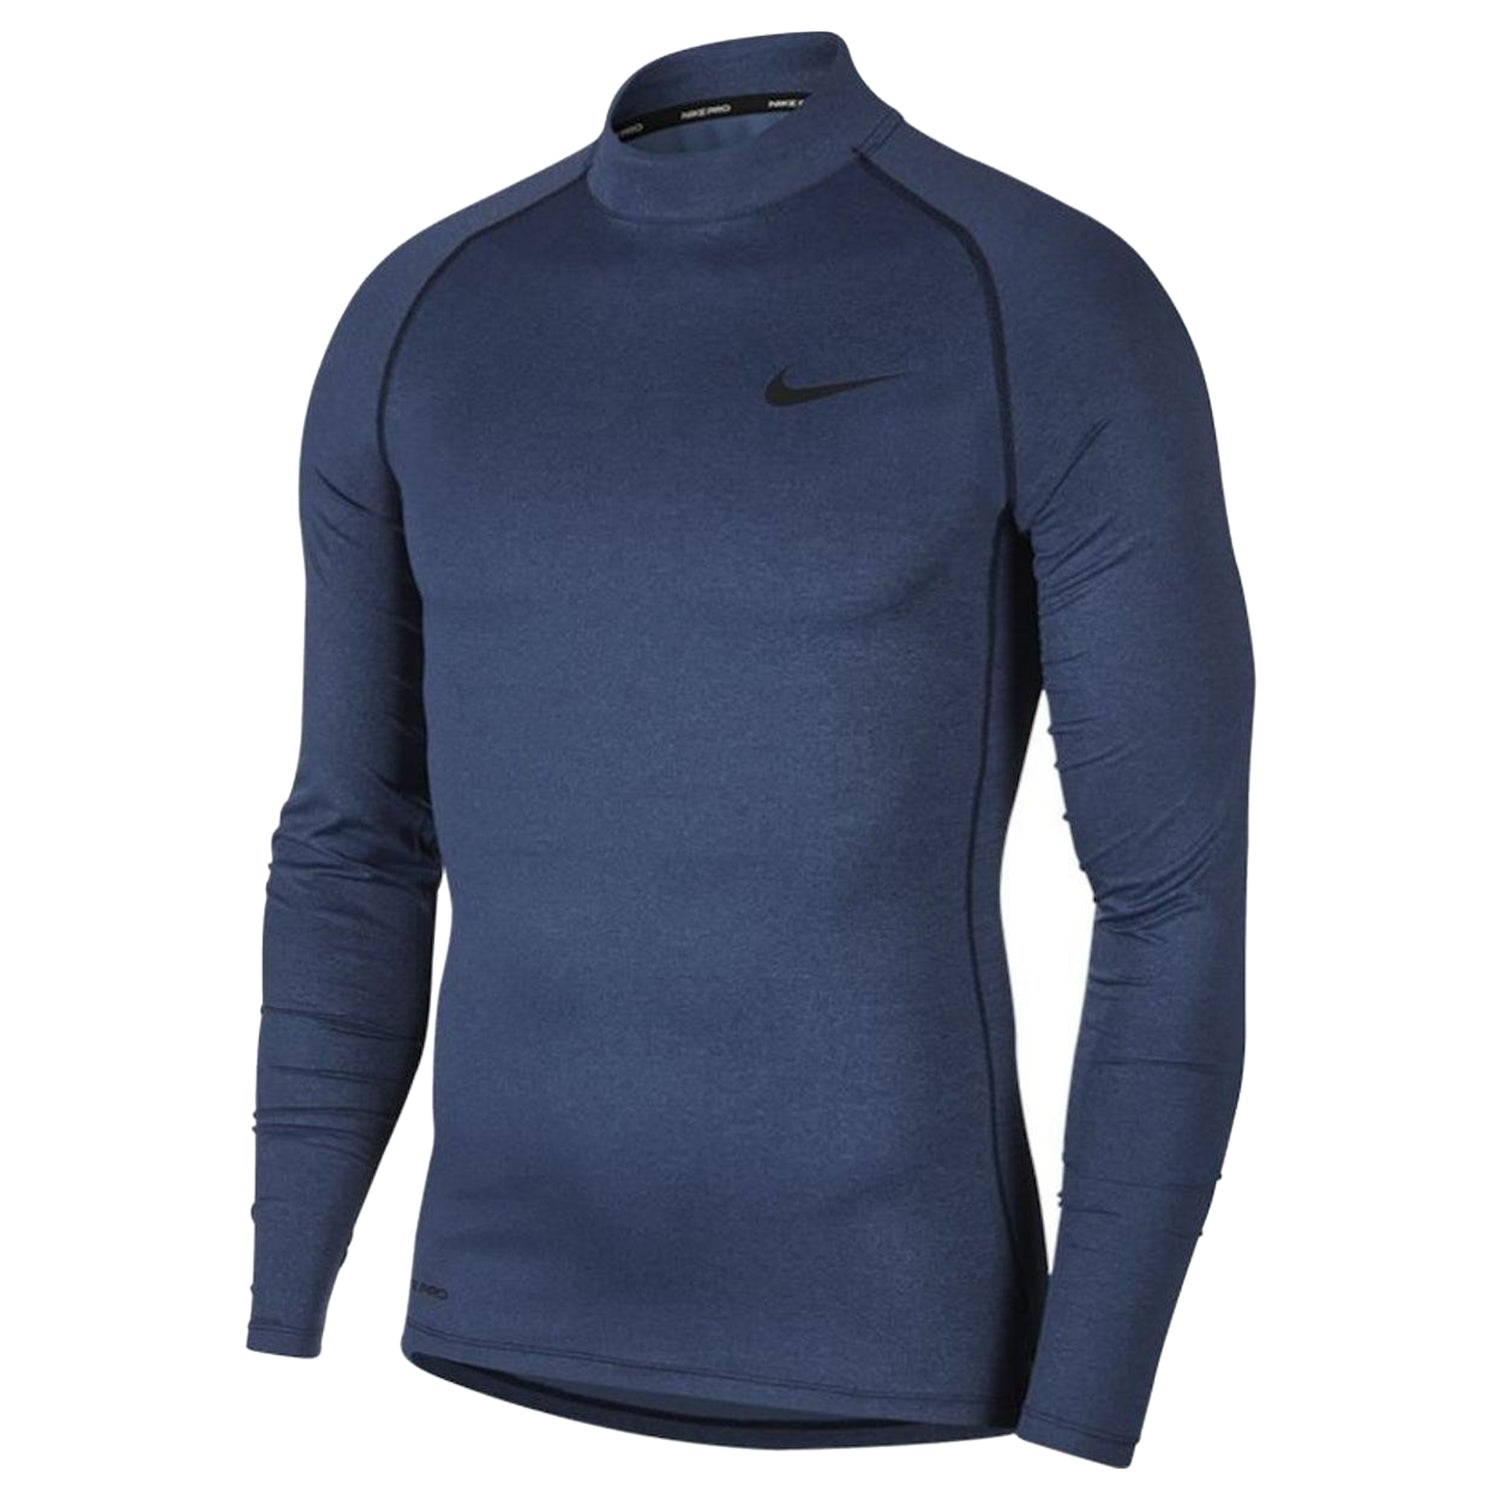 Nike Pro Compression Long Sleeve Top Mens Style : Bv5592